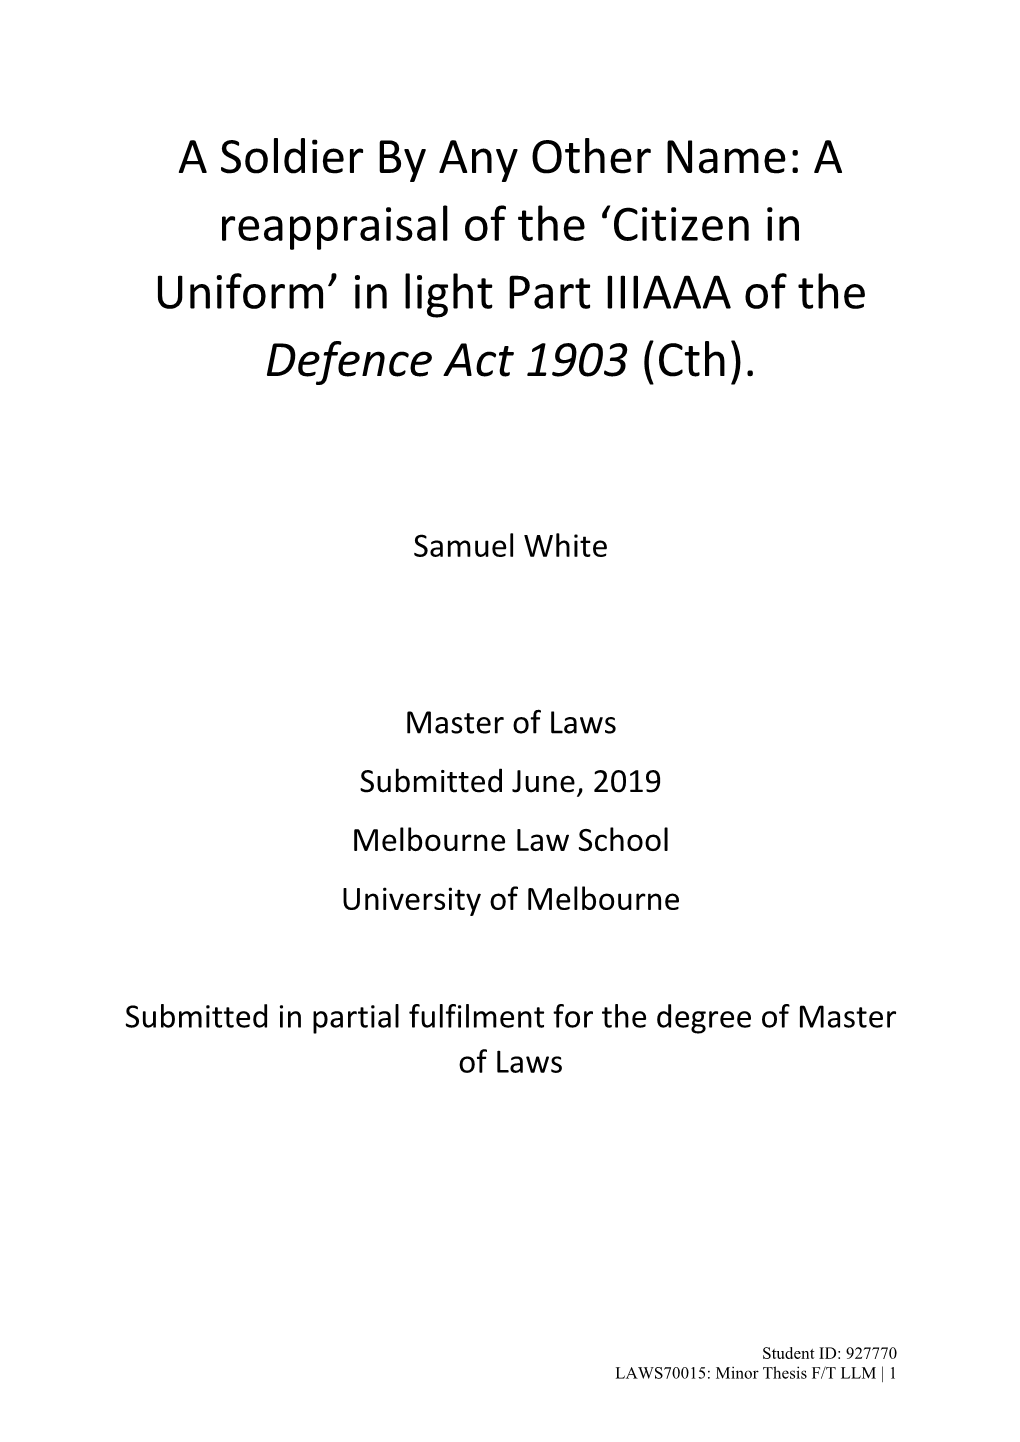 'Citizen in Uniform' in Light Part IIIAAA of the Defence Act 1903 (Cth)